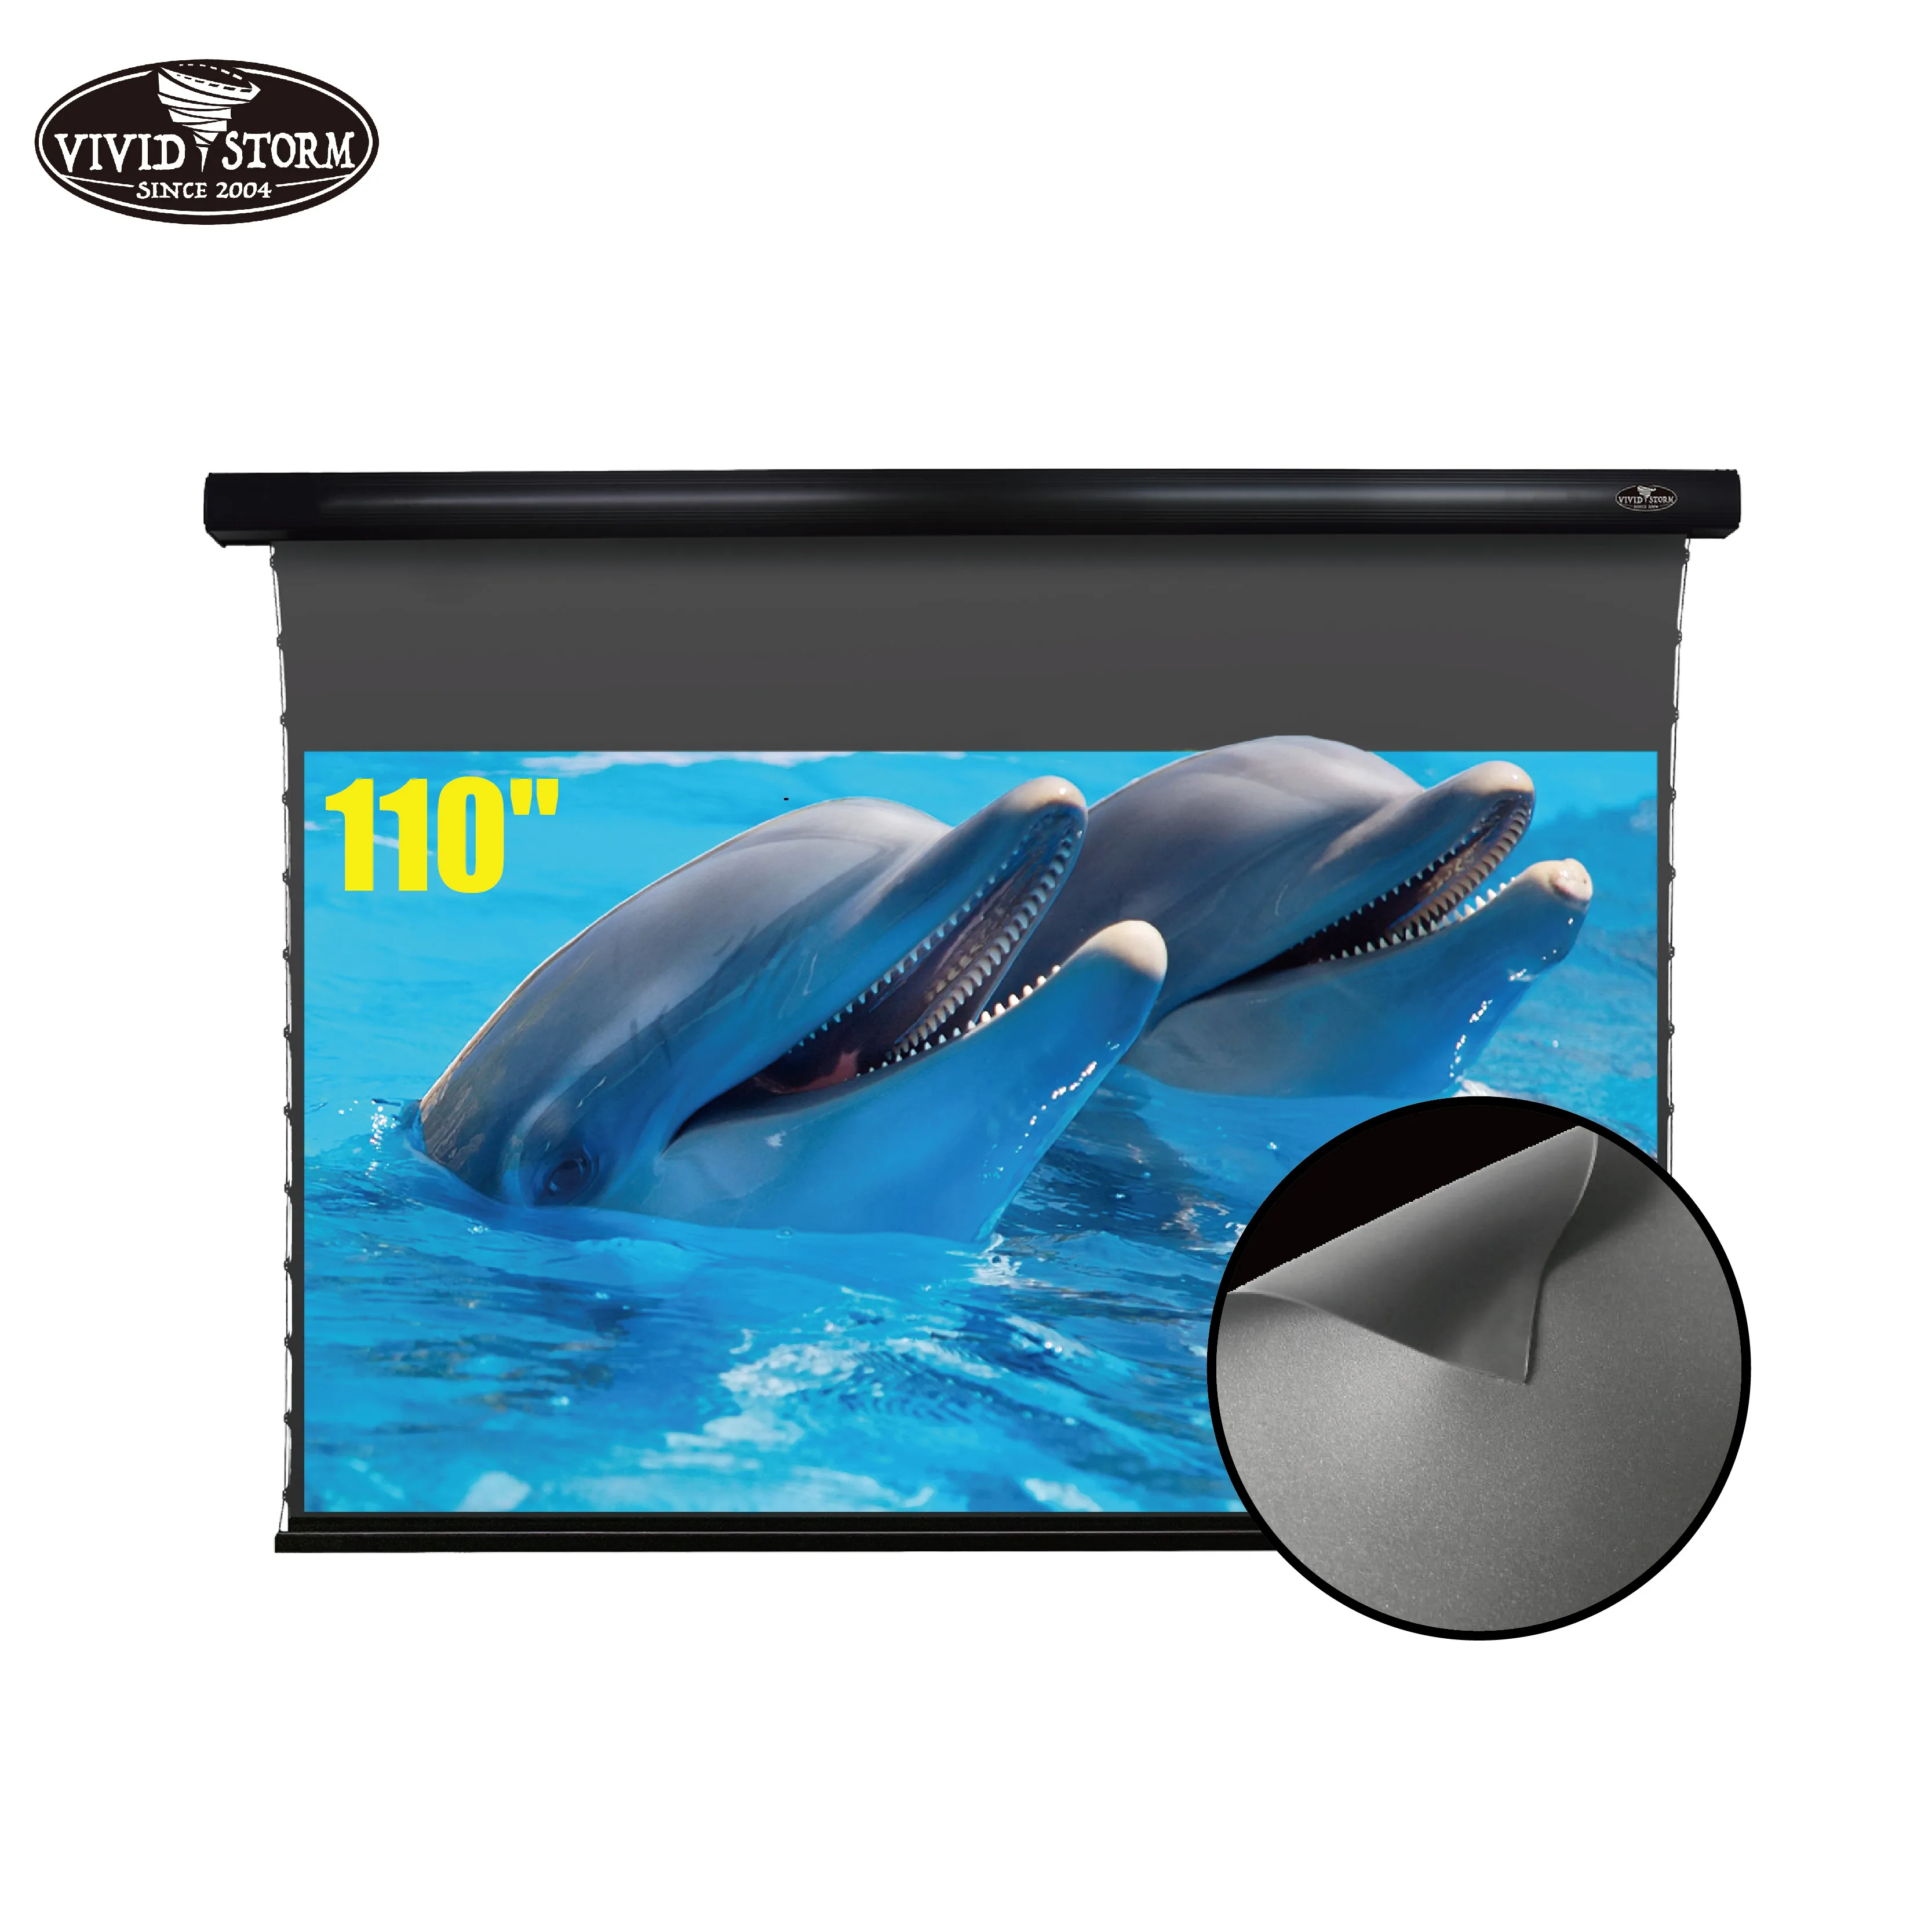 

VIVIDSTORM 110inch Slimline motorized Screen ALR controlled with projector dongle trigger tensioned screen electric